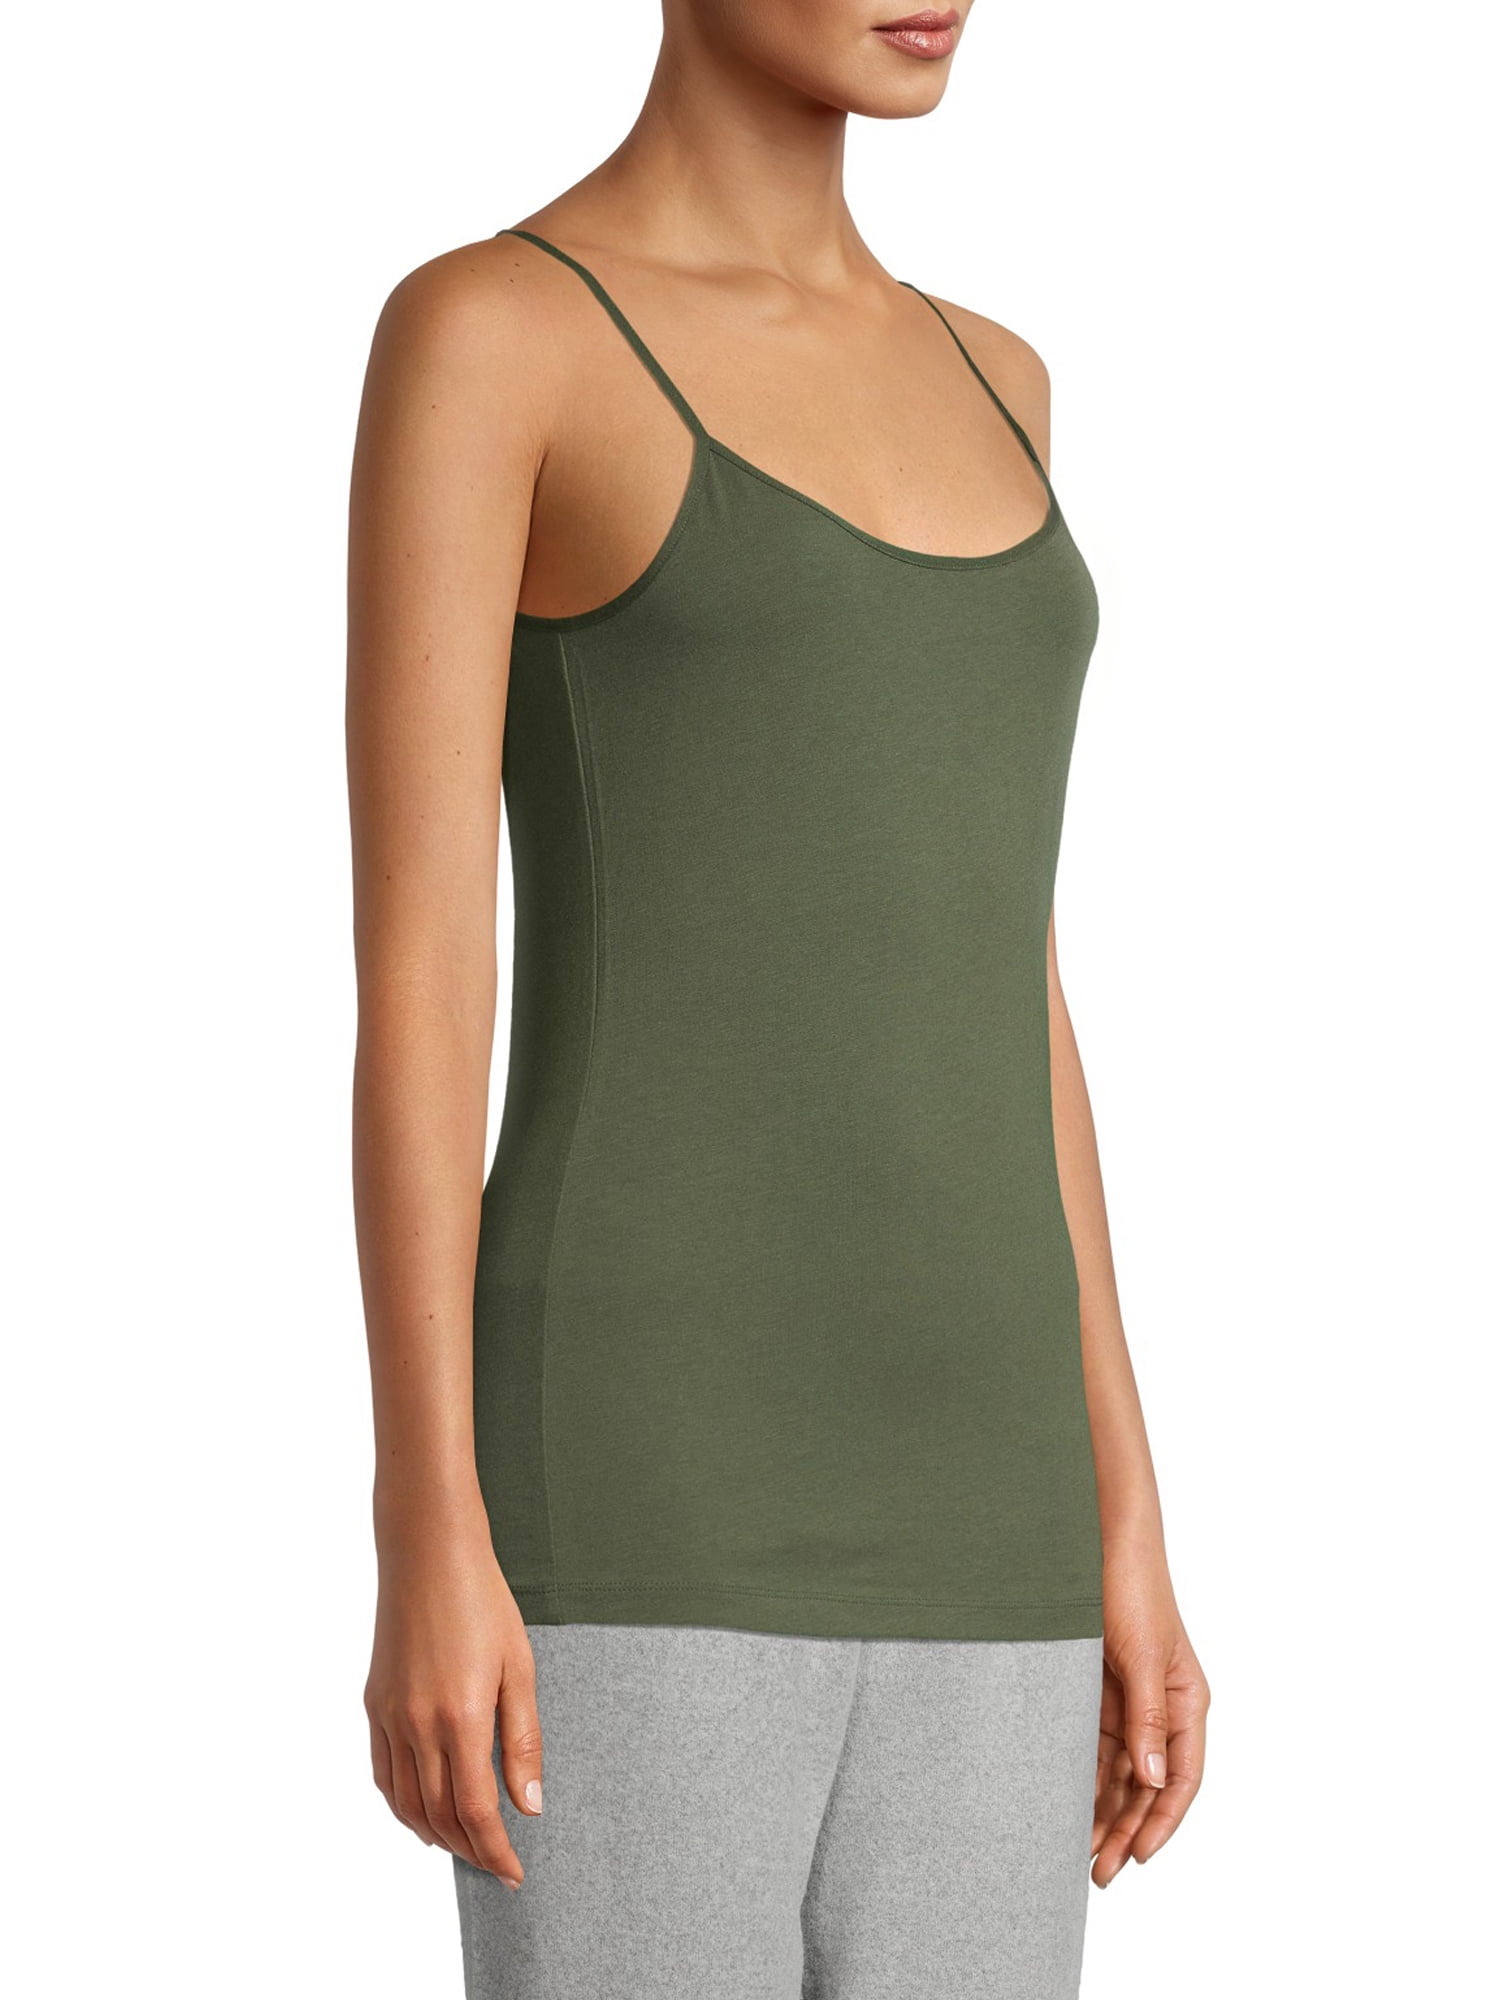 Womens Camisoles And Tanks Camisole For Women Womens Tank Tops Casual Women  Camisole Deals Of The Day Lightning Deals Today Prime On Sale Clearance Items  Under 10 Dollars Under 15 Dollar Items